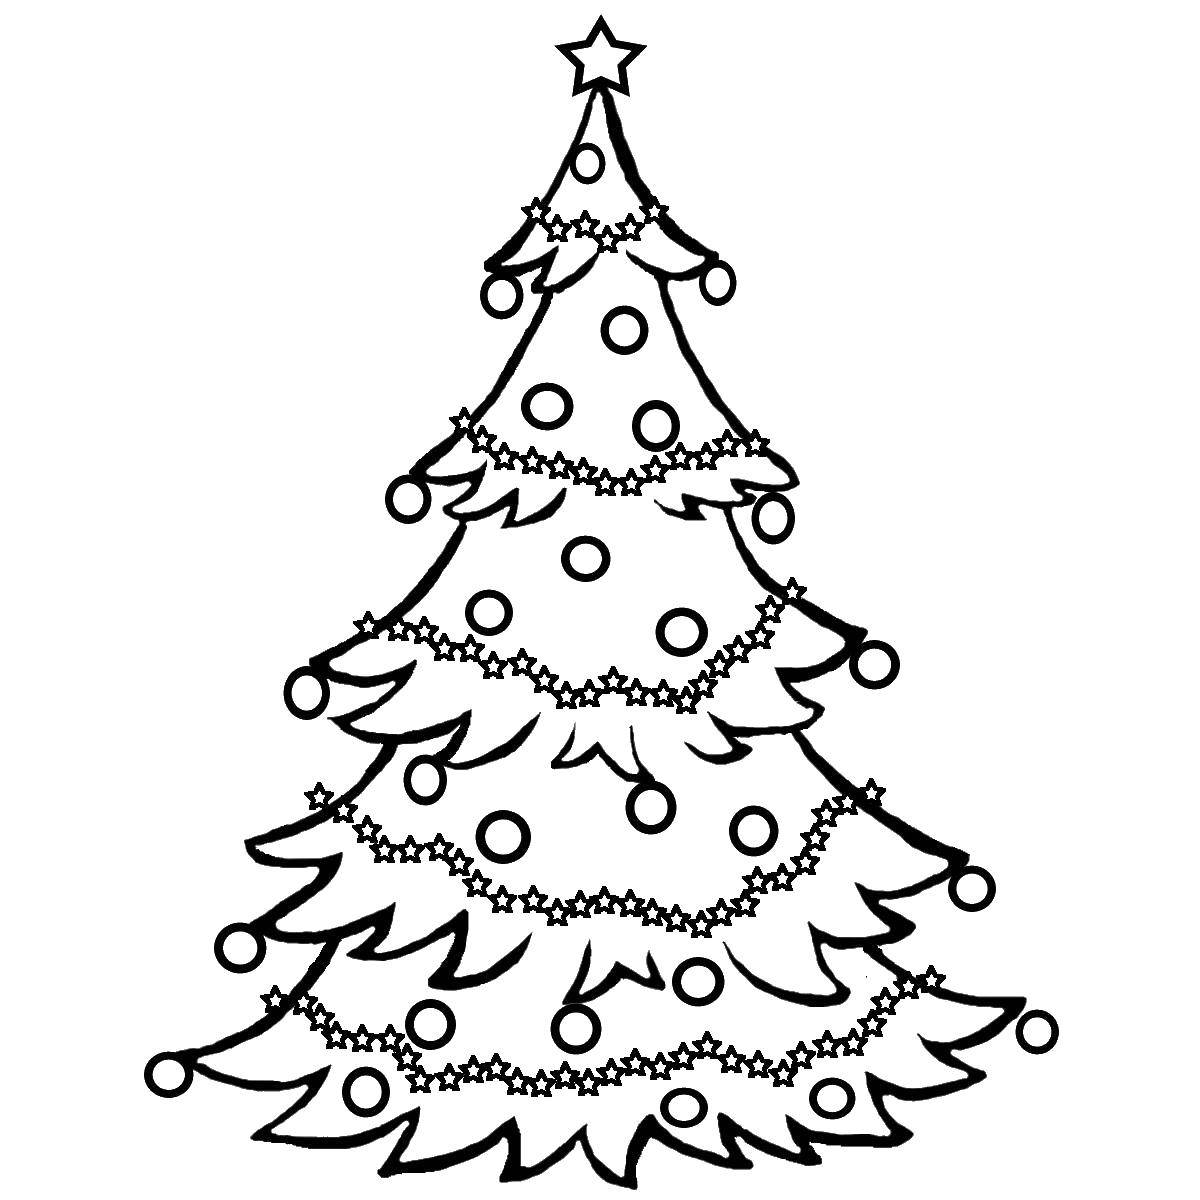 Coloring Tree with garlands. Category coloring Christmas tree. Tags:  the tree , lights, .